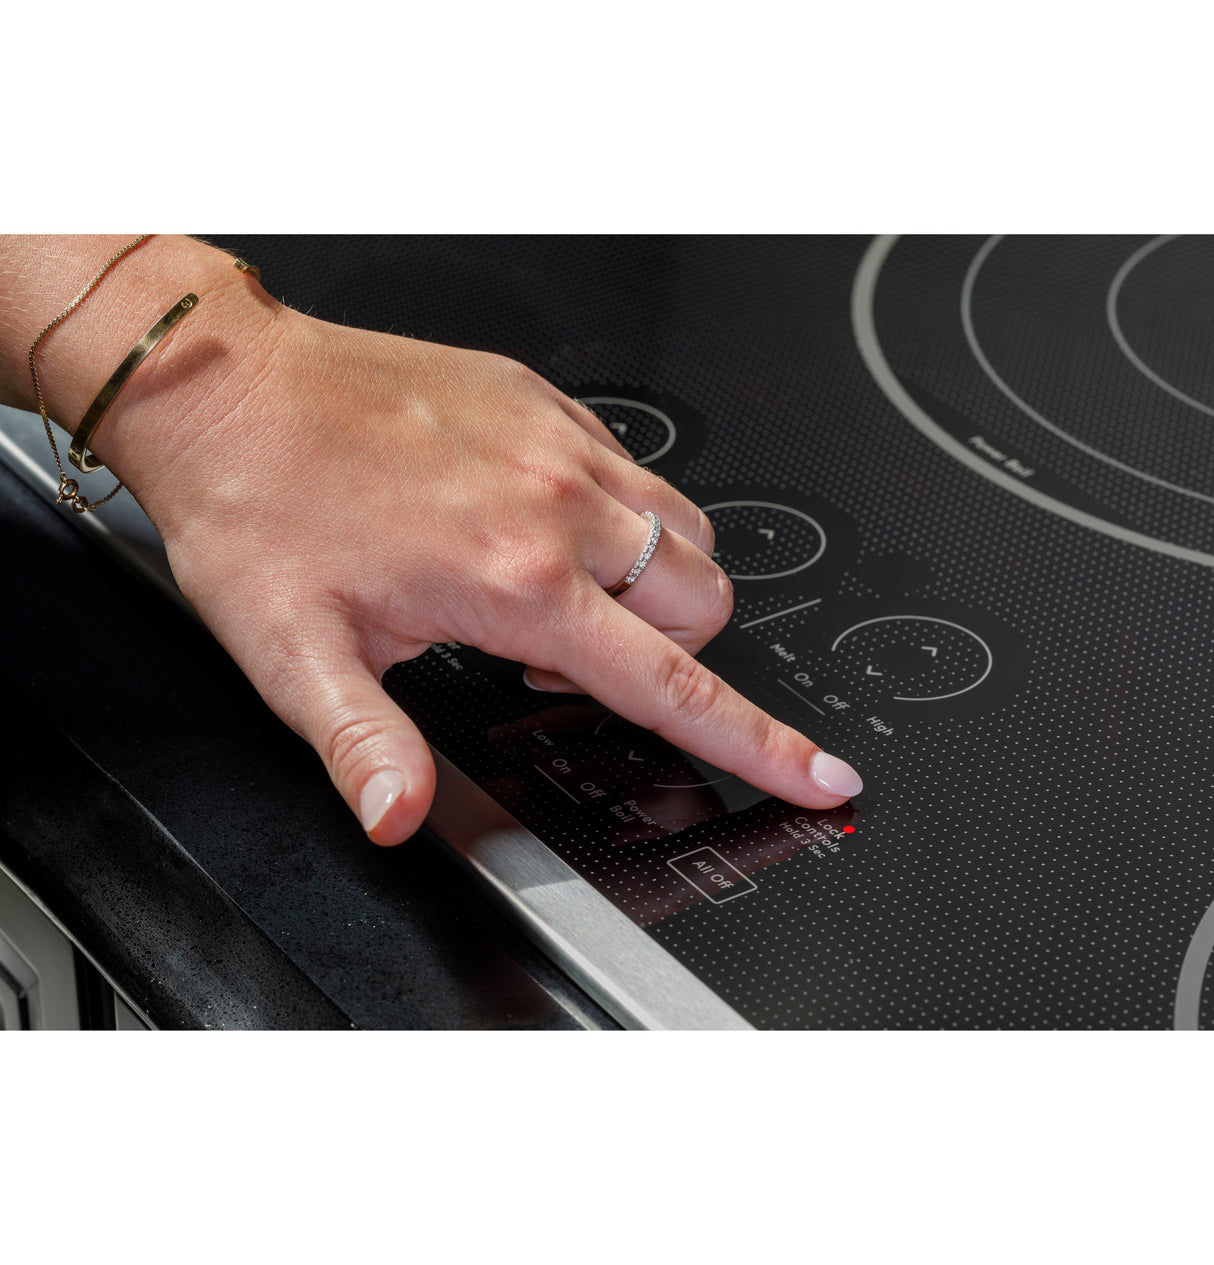 Caf(eback)(TM) 36" Touch-Control Electric Cooktop - (CEP90361TBB)